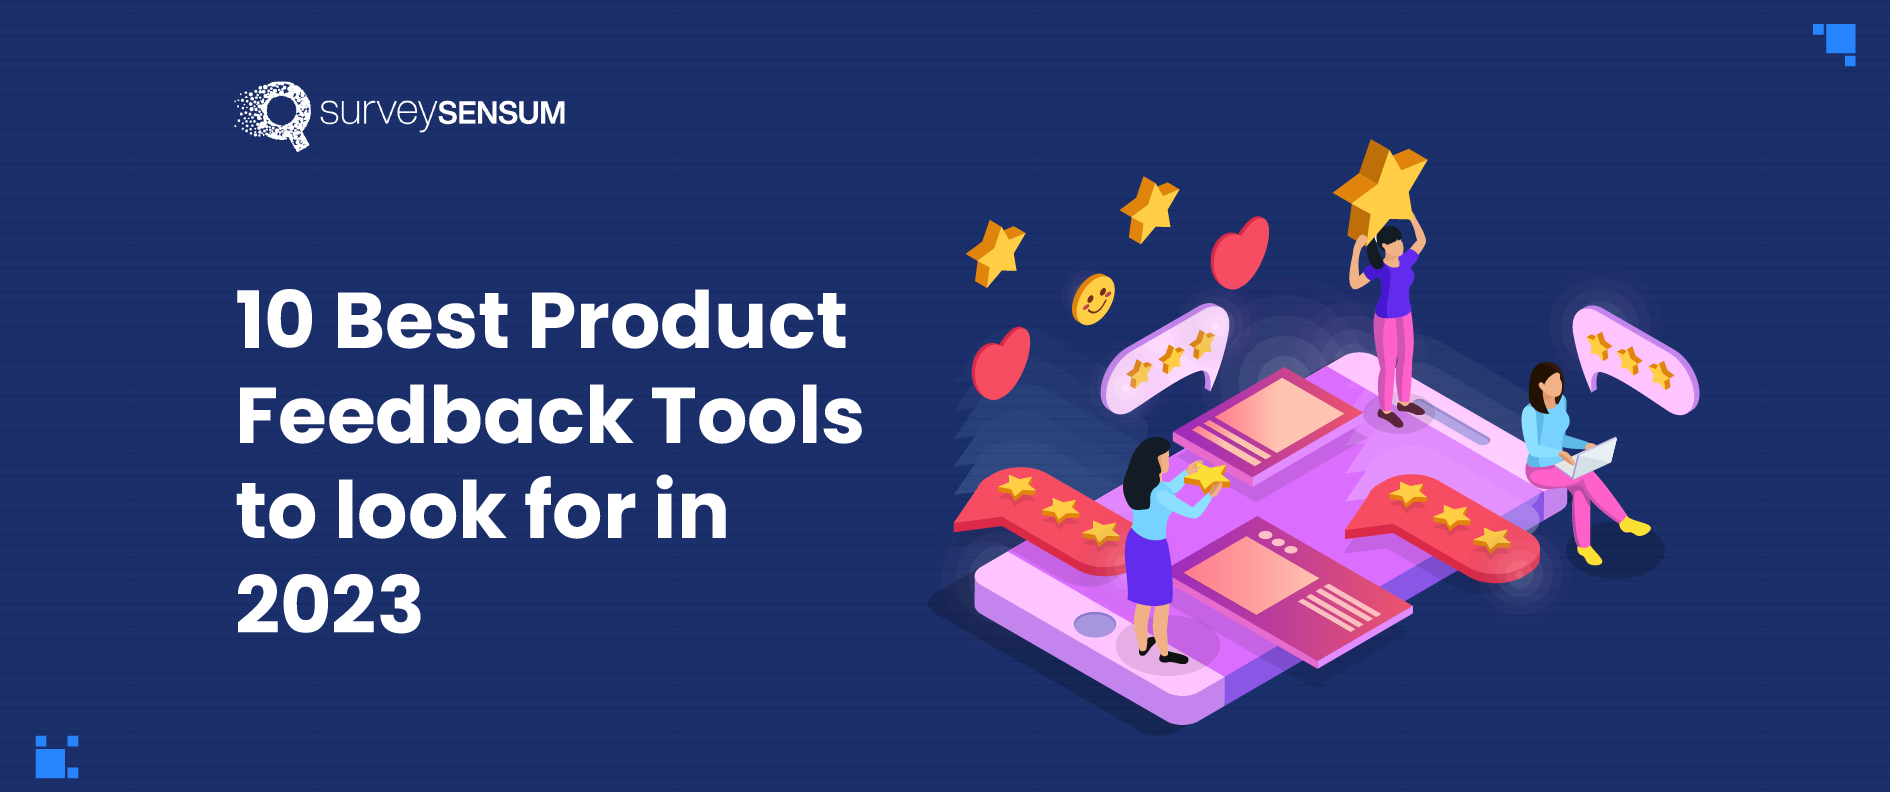 10 Best Product Feedback Tools to look for in 2023